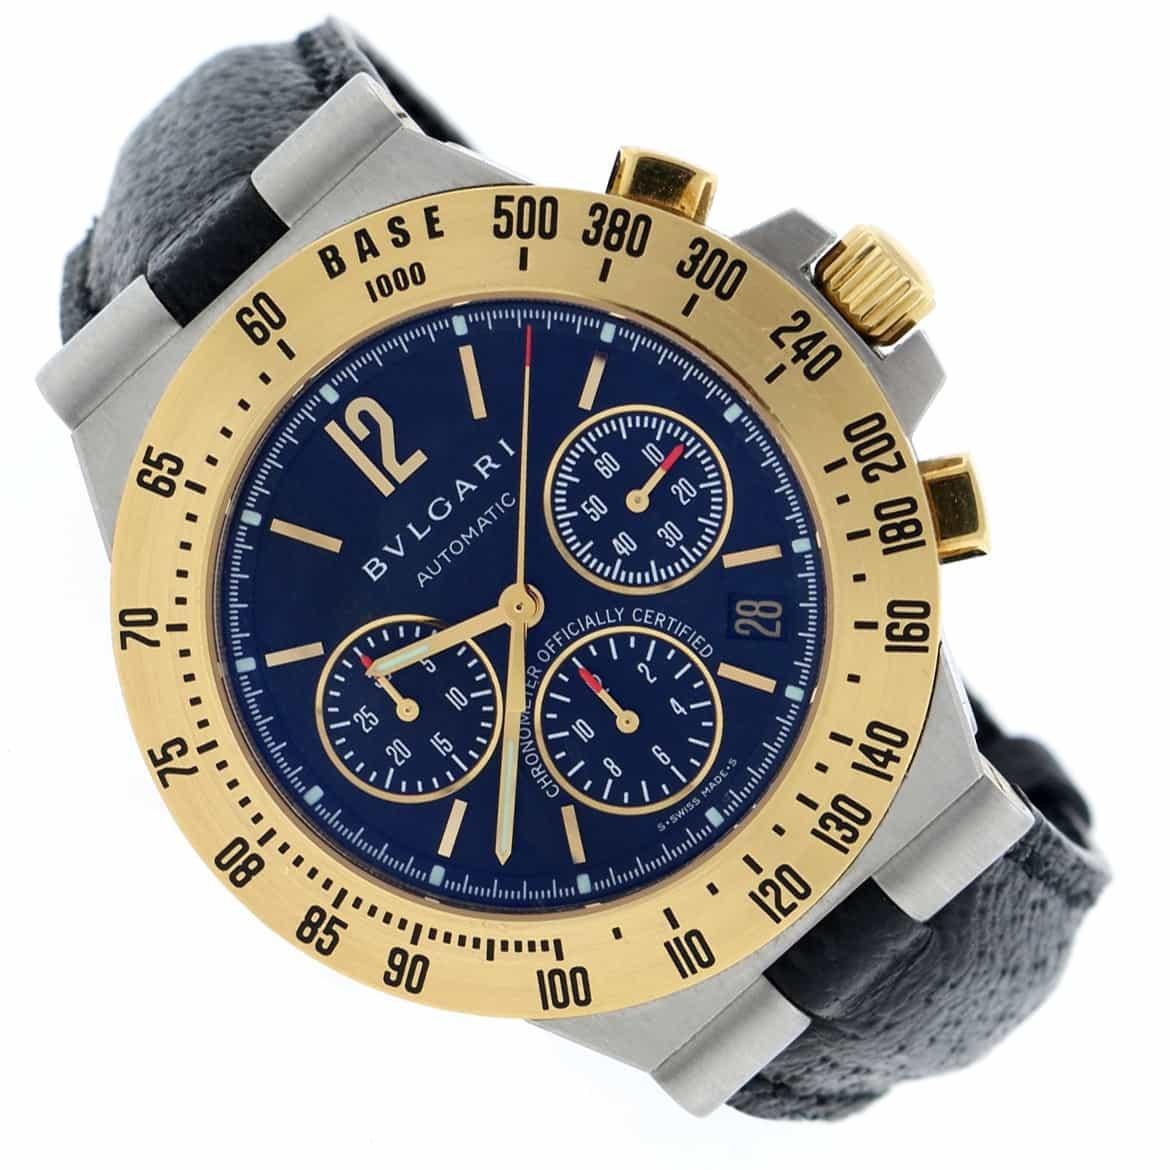 Bvlgari Diagono Chronograph 2-Tone 18K Yellow Gold & Stainless Steel Automatic Mens Watch CH 40 SG TA

Bvlgari Diagono Chronograph 2-Tone Automatic Mens Watch, CH 40 SG TA. Self-winding Bvlgari automatic movement. Stainless steel case 40mm in